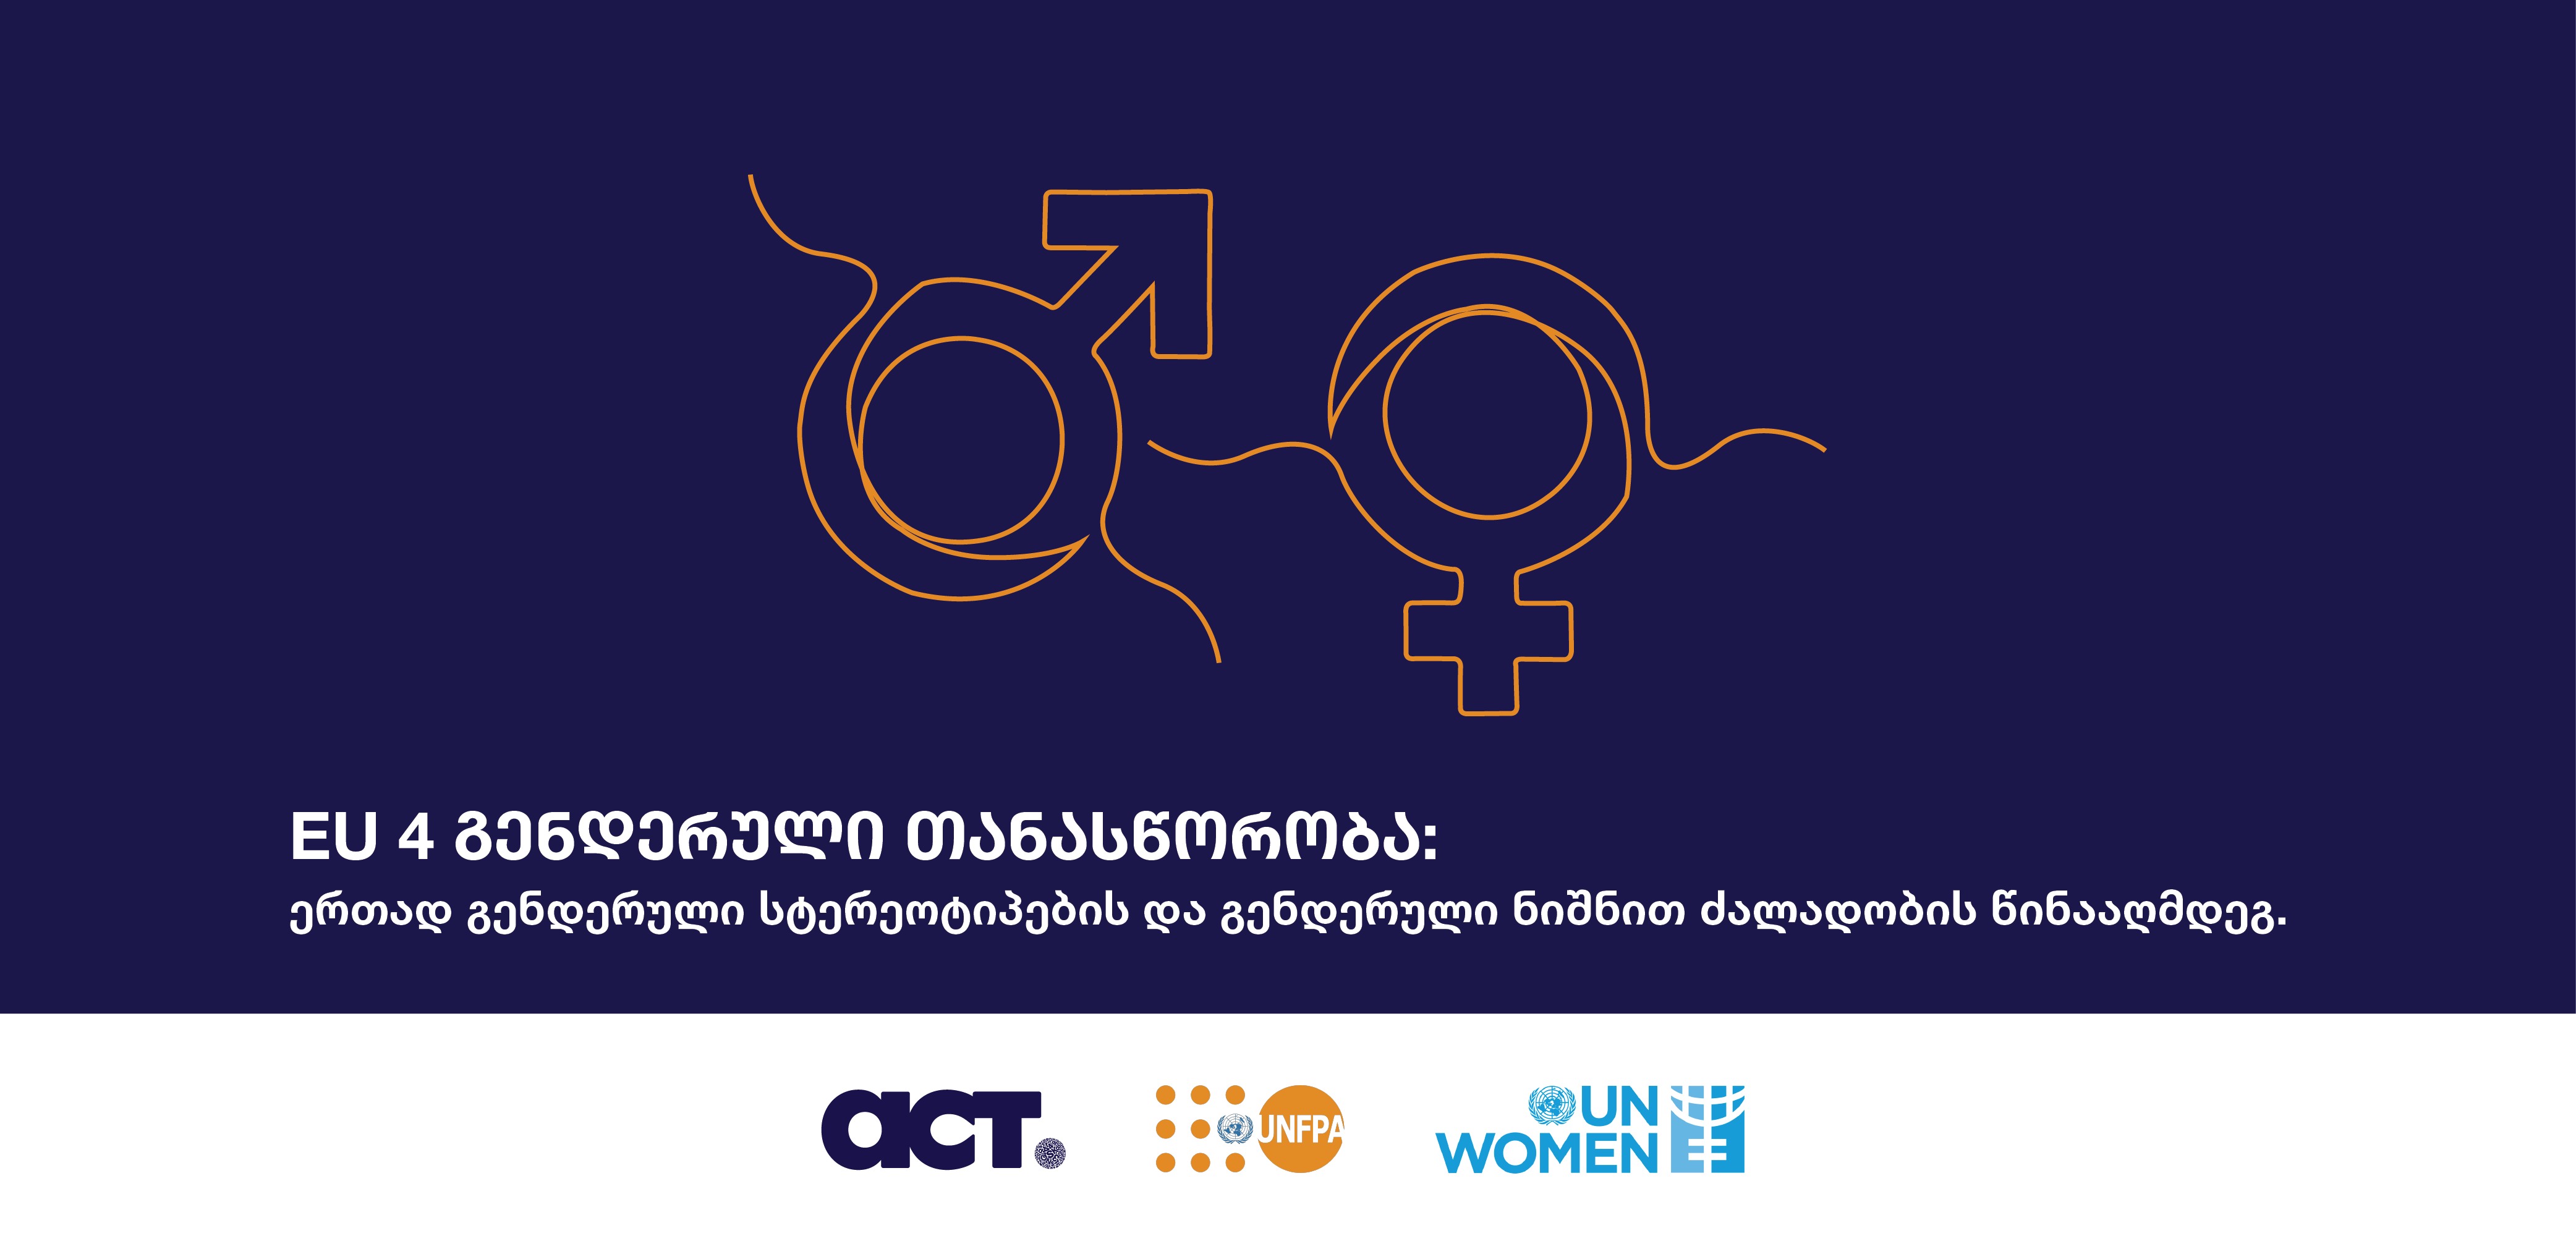 ACT was contracted by UN Women and UNFPA within the framework of the Joint Programme “EU 4 Gender Equality: Together against gender stereotypes and gender-based violence” 